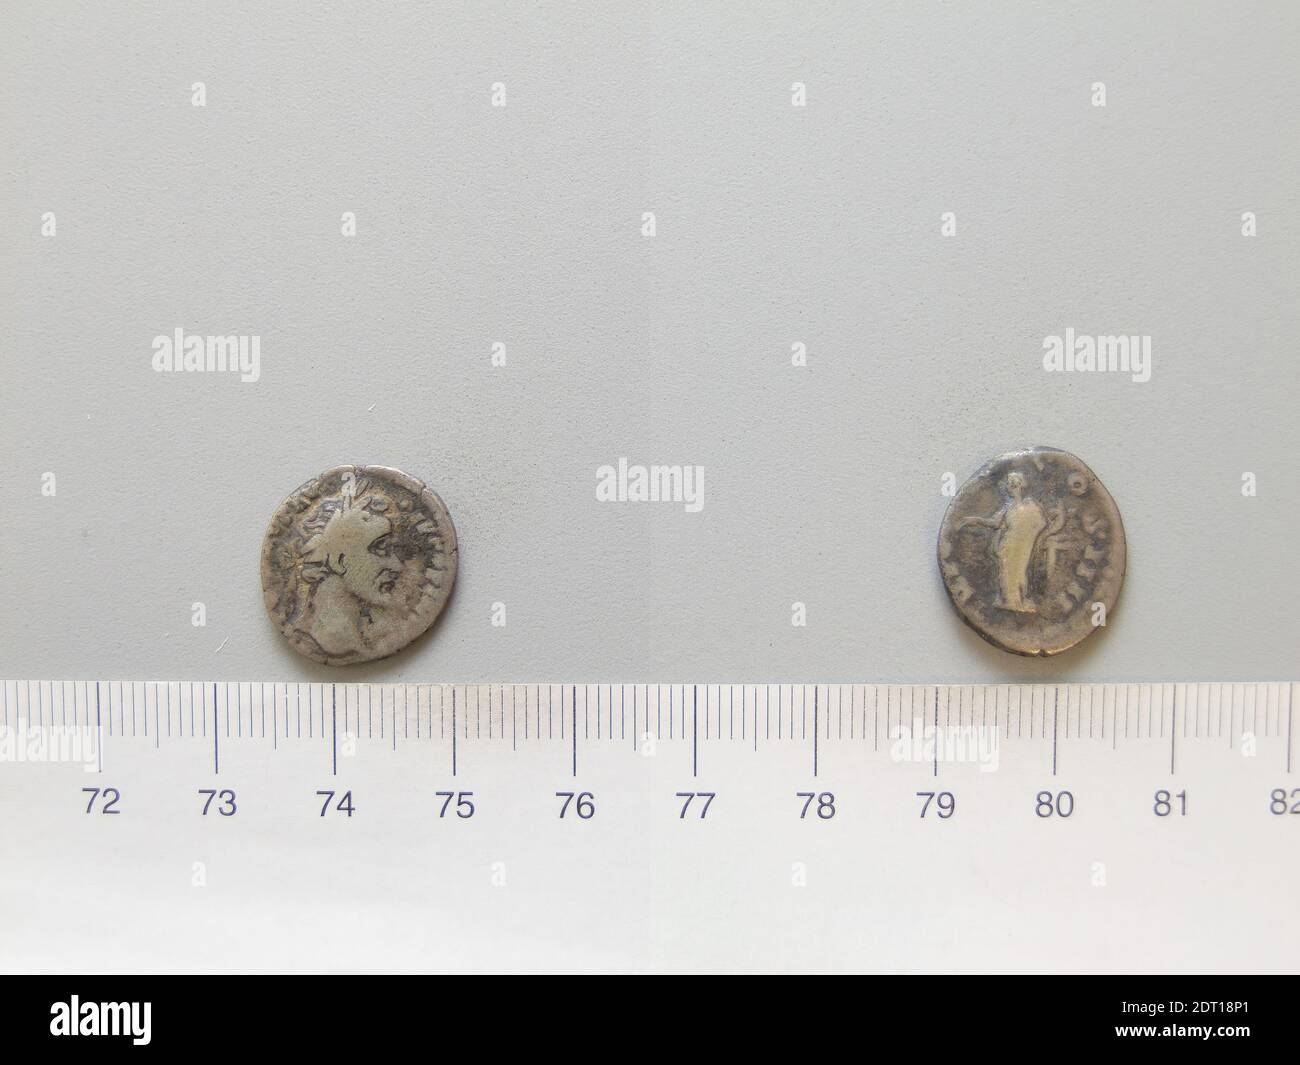 Ruler: Antoninus Pius, Emperor of Rome, A.D. 86–161, ruled A.D. 138–161, Mint: Rome, Denarius of Antoninus Pius, Emperor of Rome from Rome, A.D. 145–61, Silver, 3.155 g, 5:00, 17.1 mm, Made in Rome, Italy, Roman, 2nd century A.D., Numismatics Stock Photo